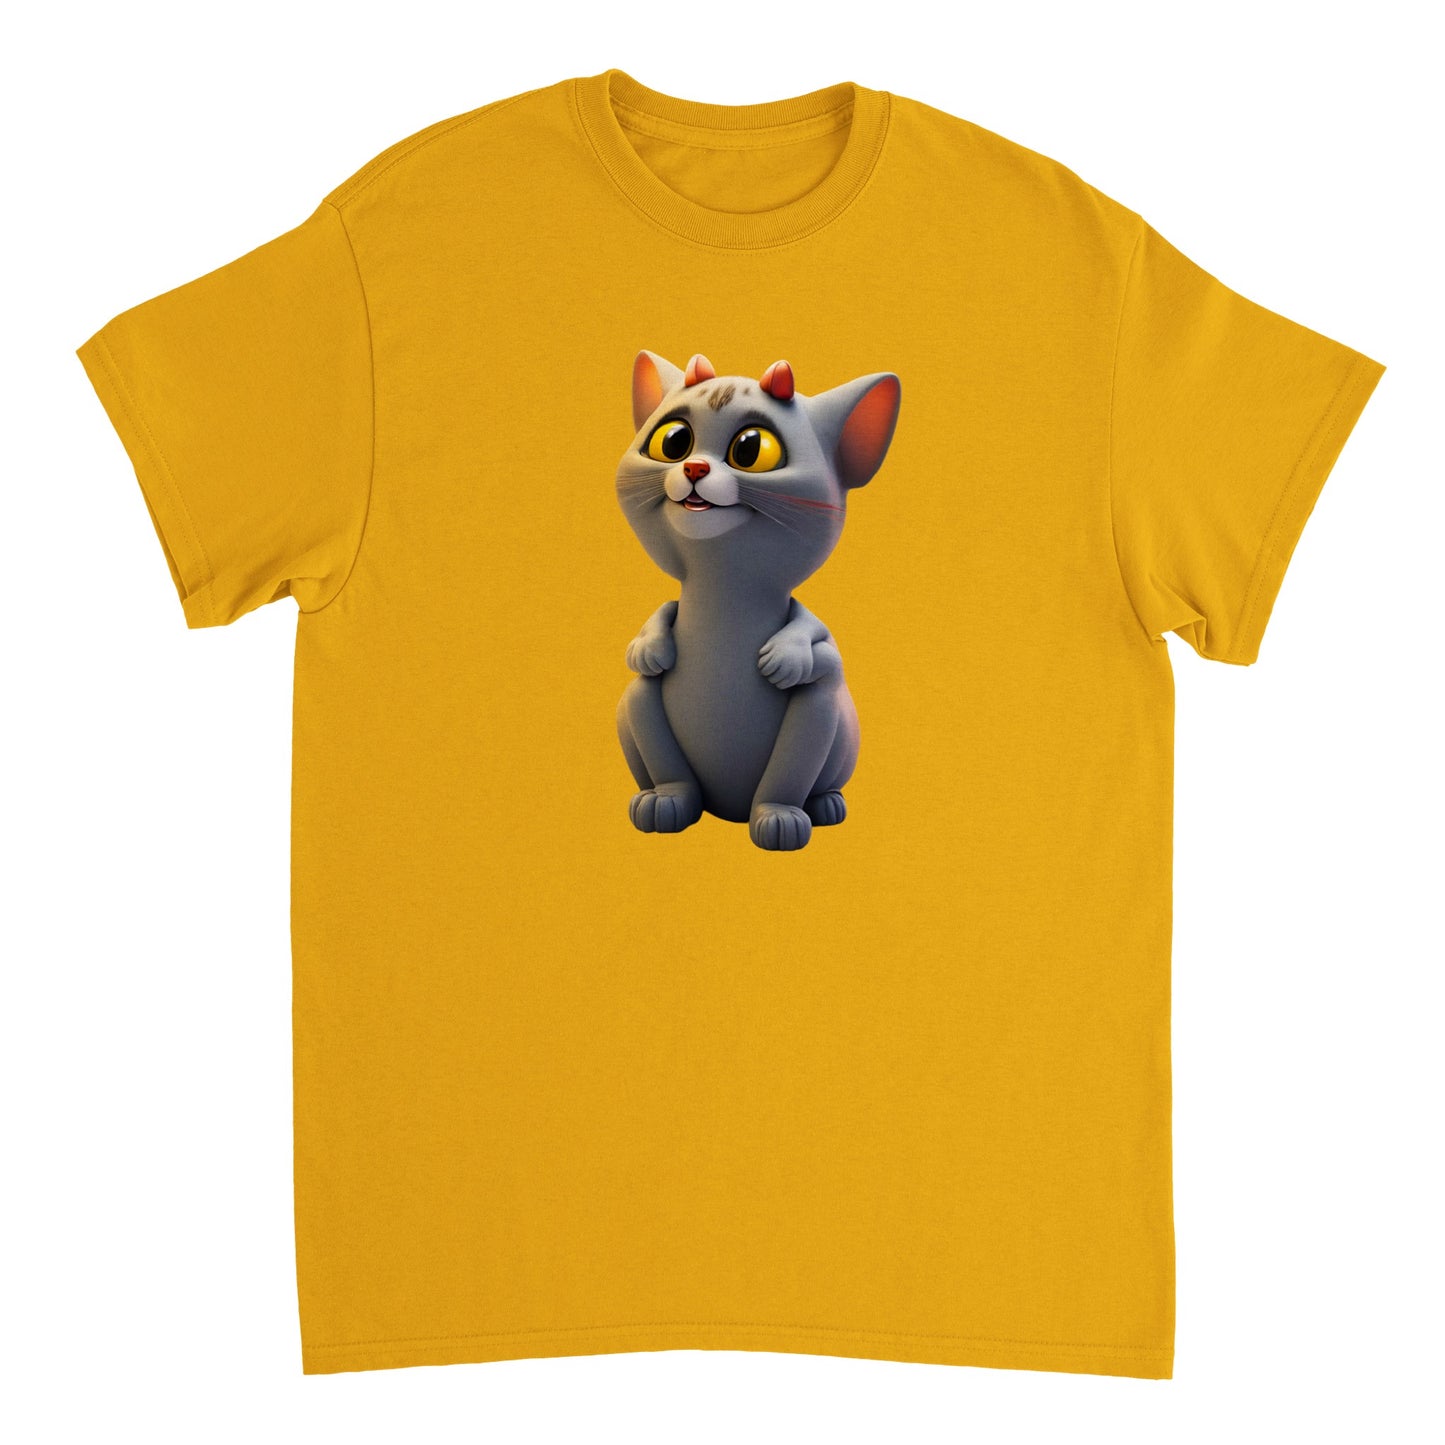 Adorable, Cool, Cute Cats and Kittens Toy - Heavyweight Unisex Crewneck T-shirt 49